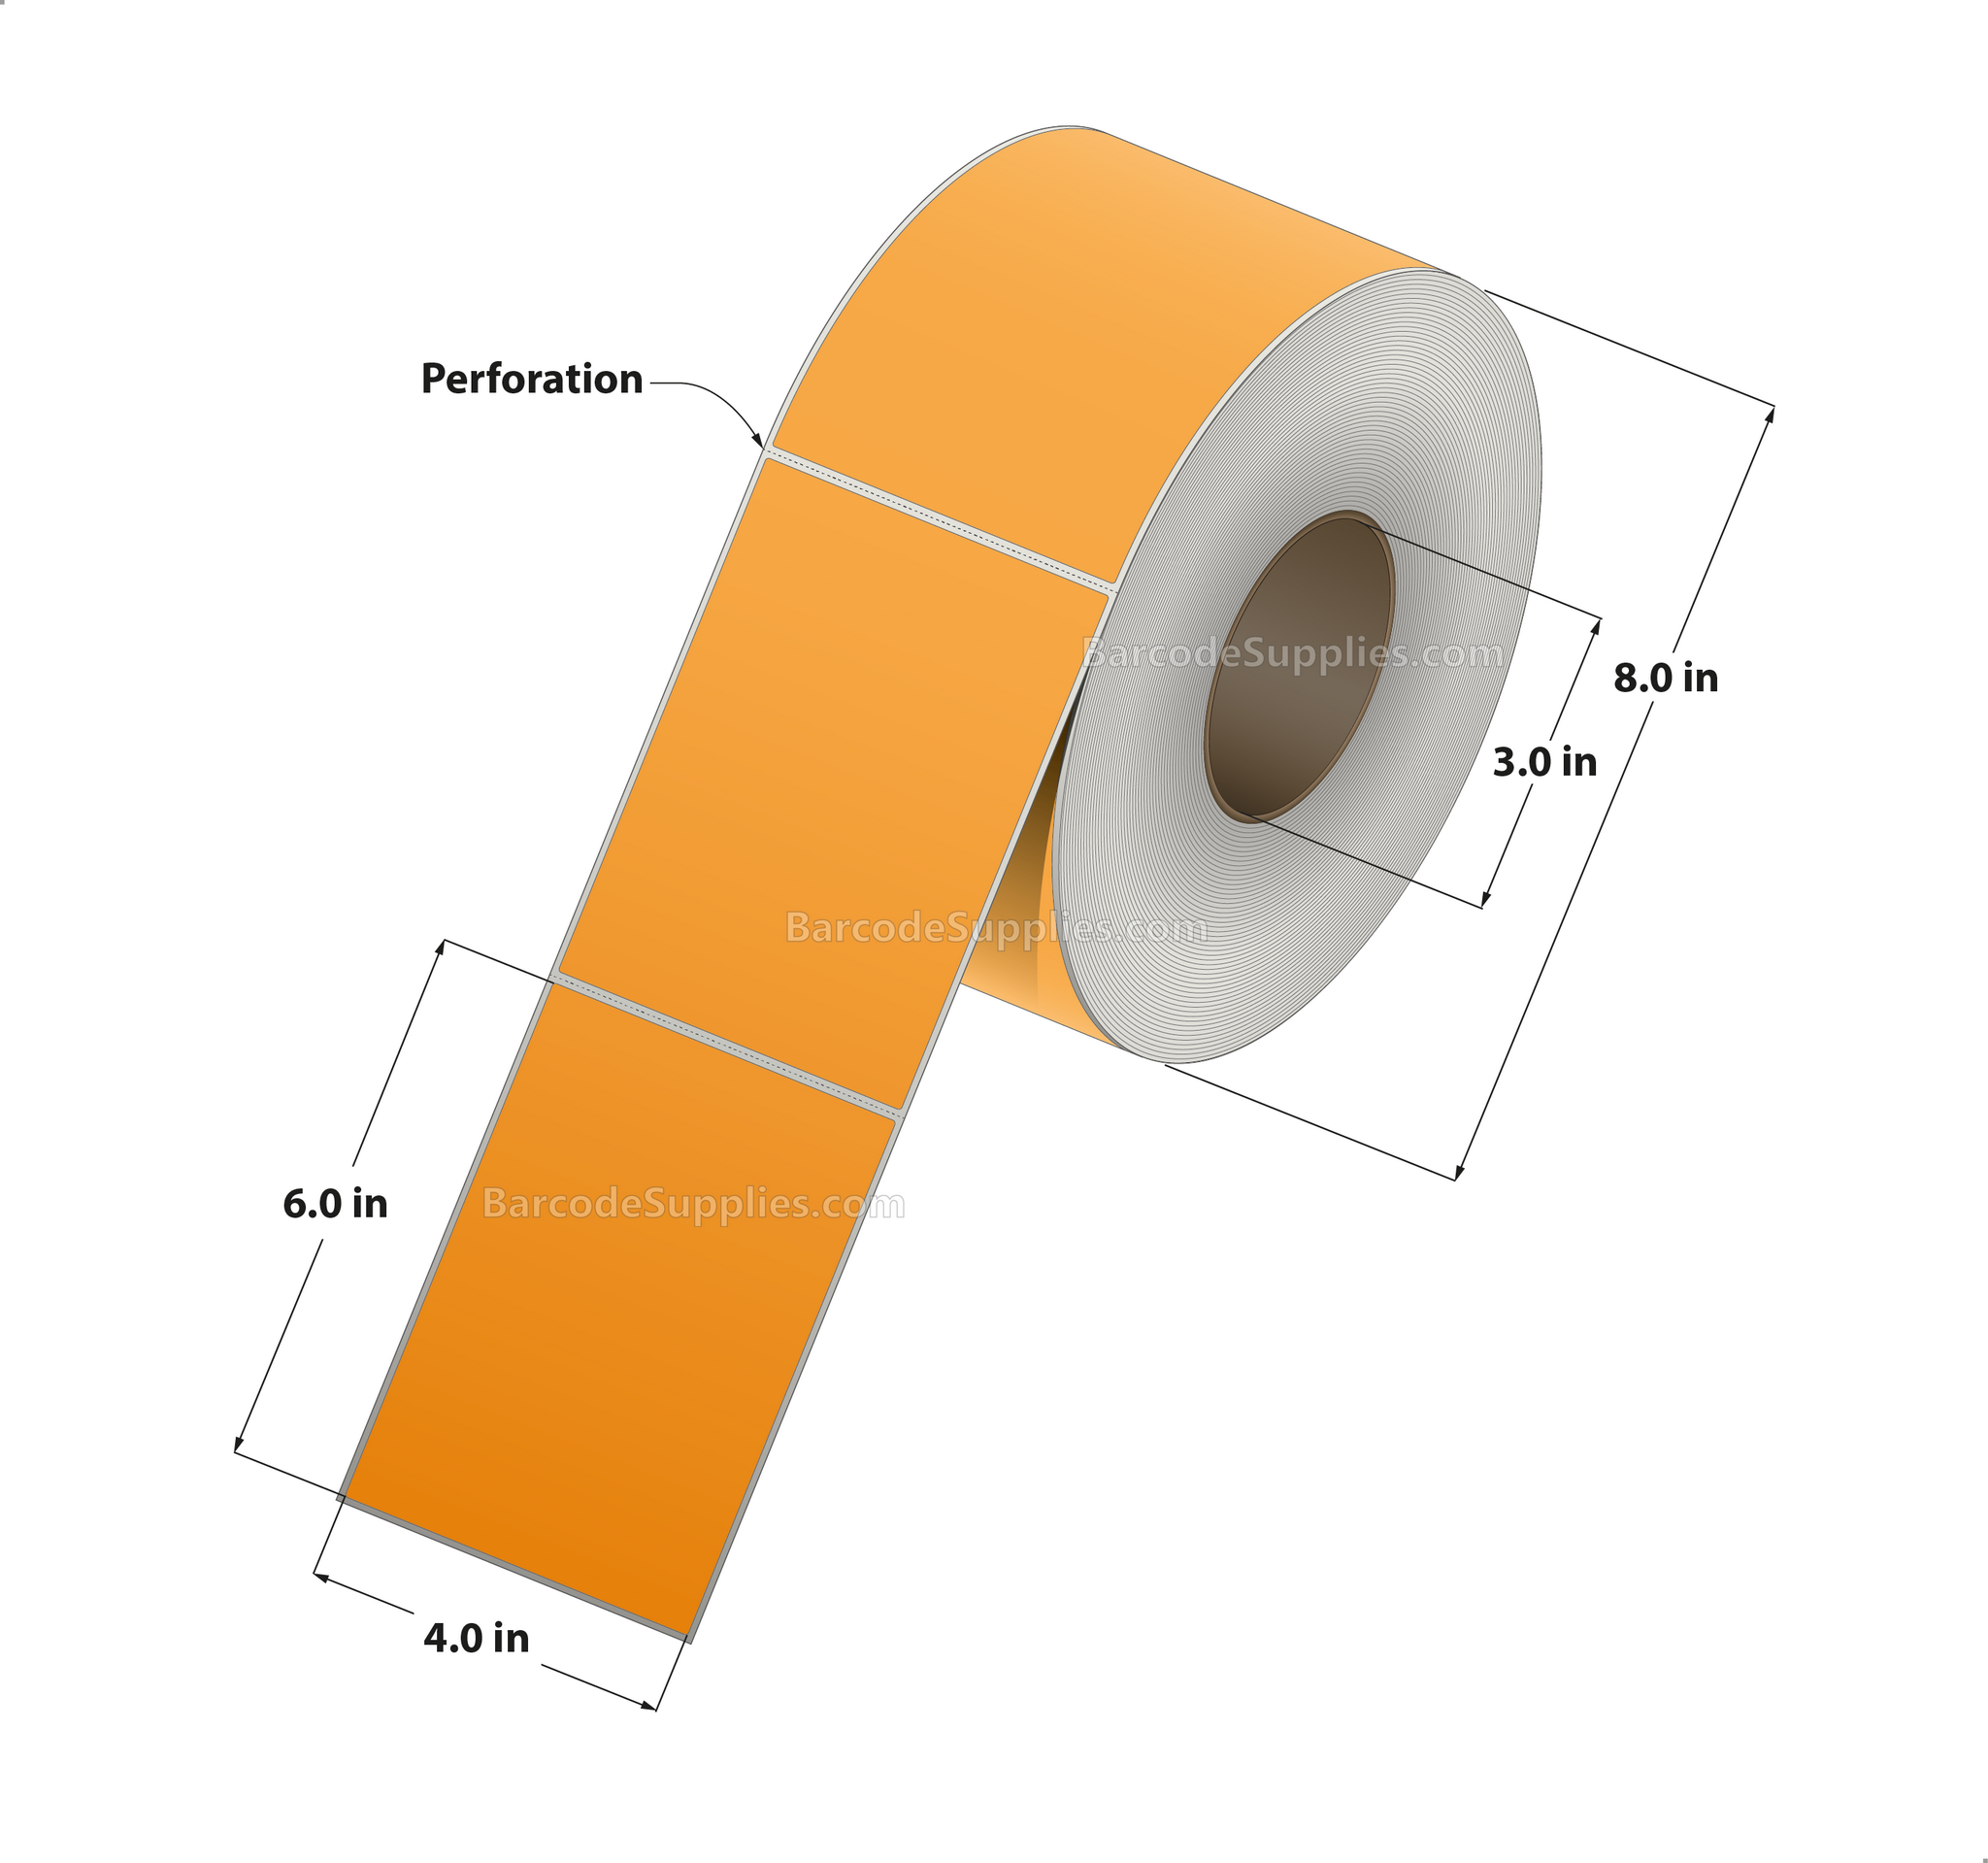 4 x 6 Thermal Transfer 136 Orange Labels With Permanent Acrylic Adhesive - Perforated - 1000 Labels Per Roll - Carton Of 4 Rolls - 4000 Labels Total - MPN: TH46-1PO